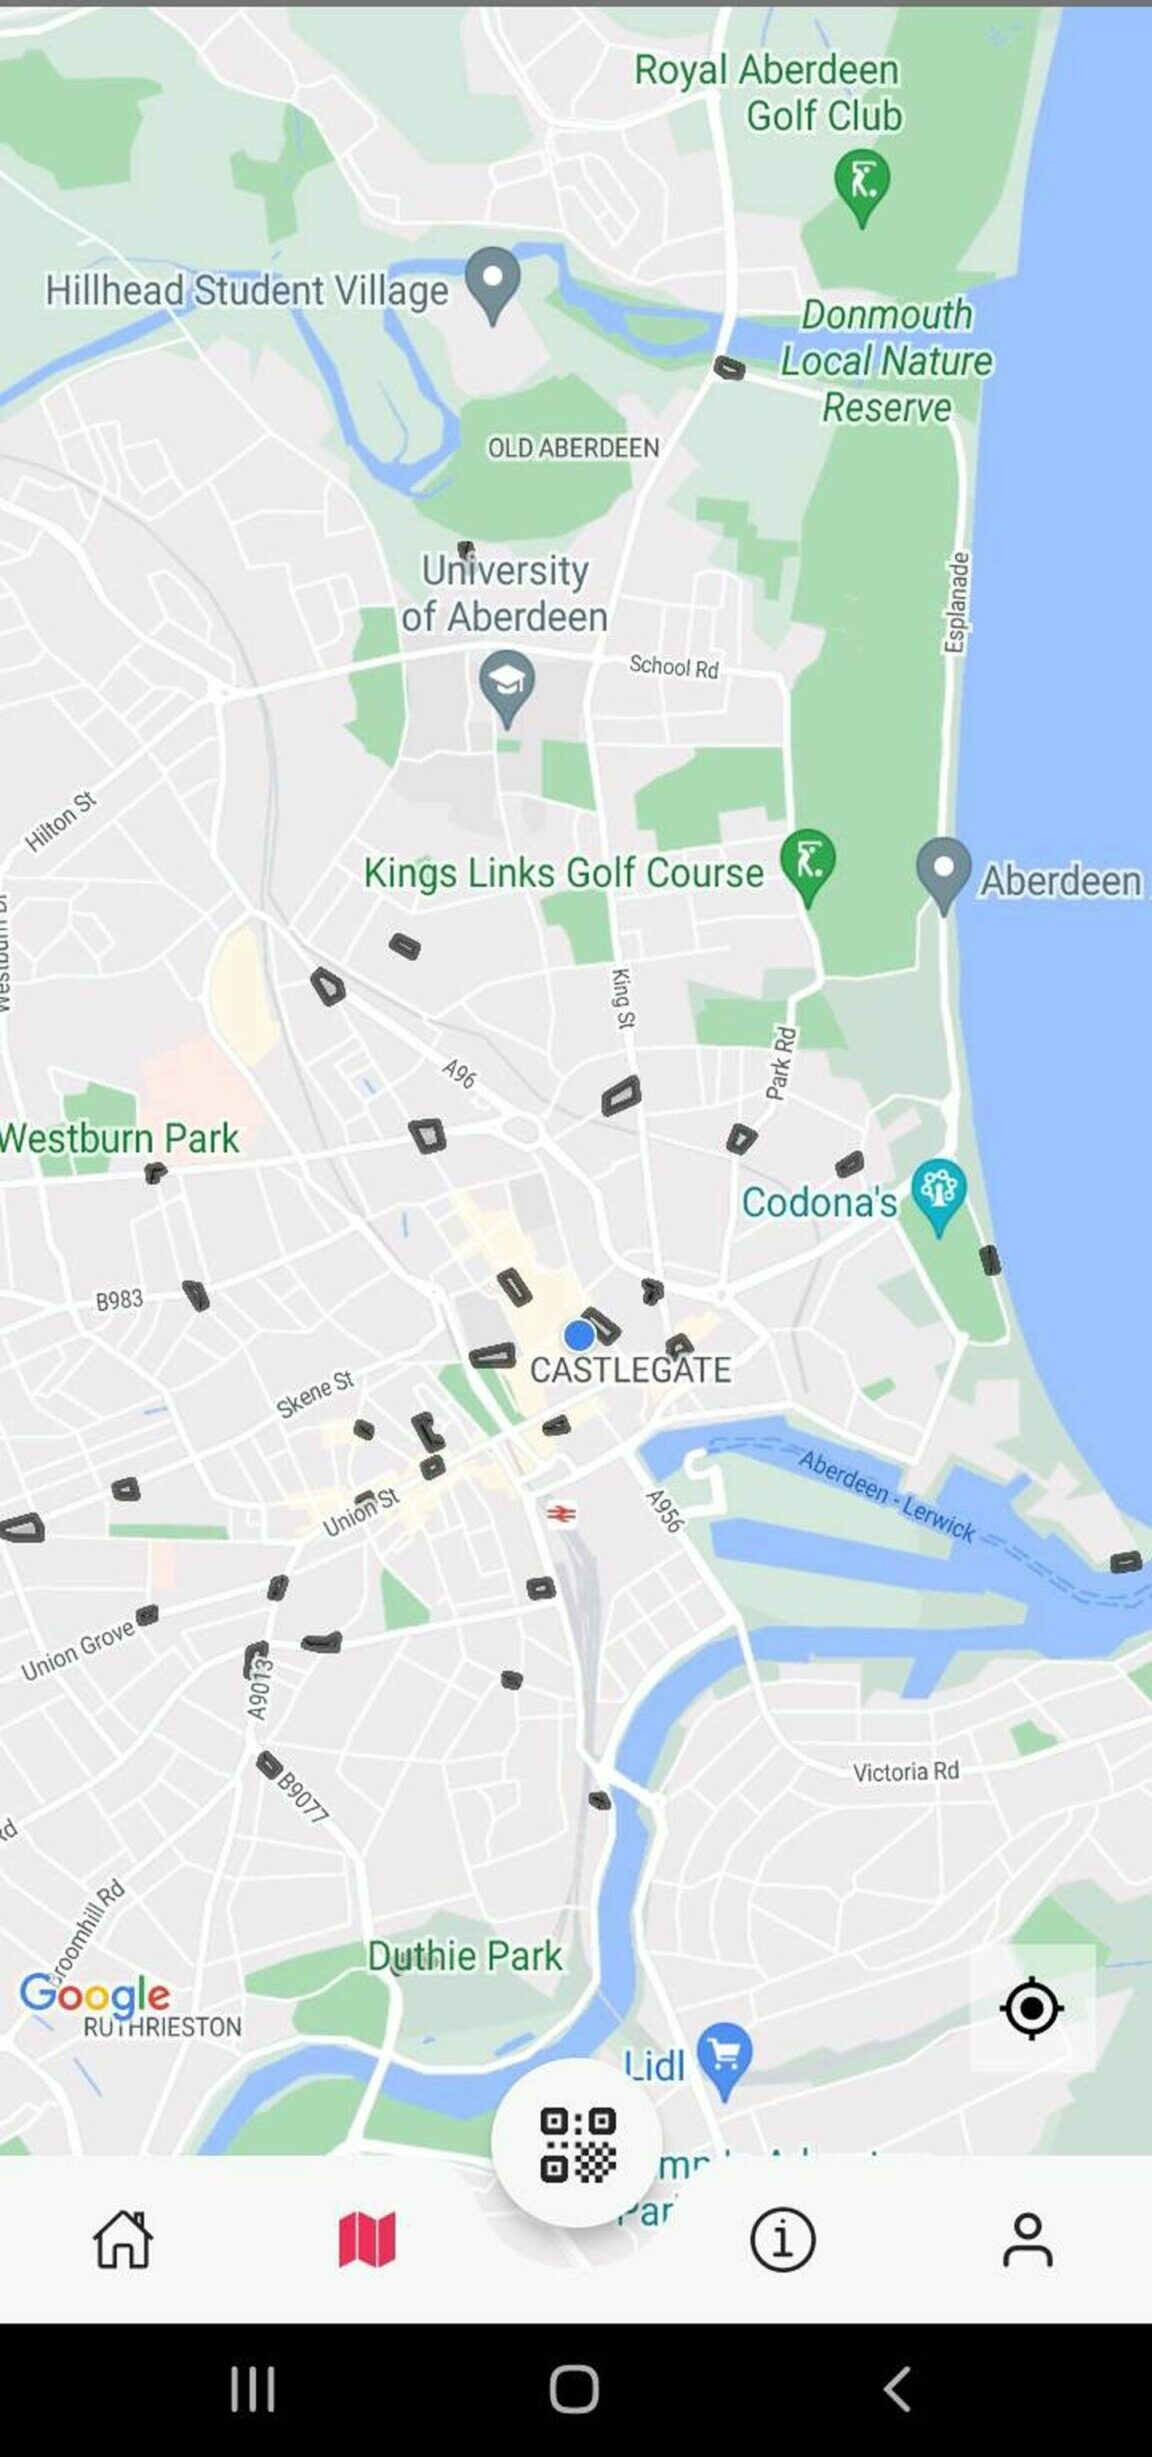 Google maps image of aberdeen showing where the ebikes will be available